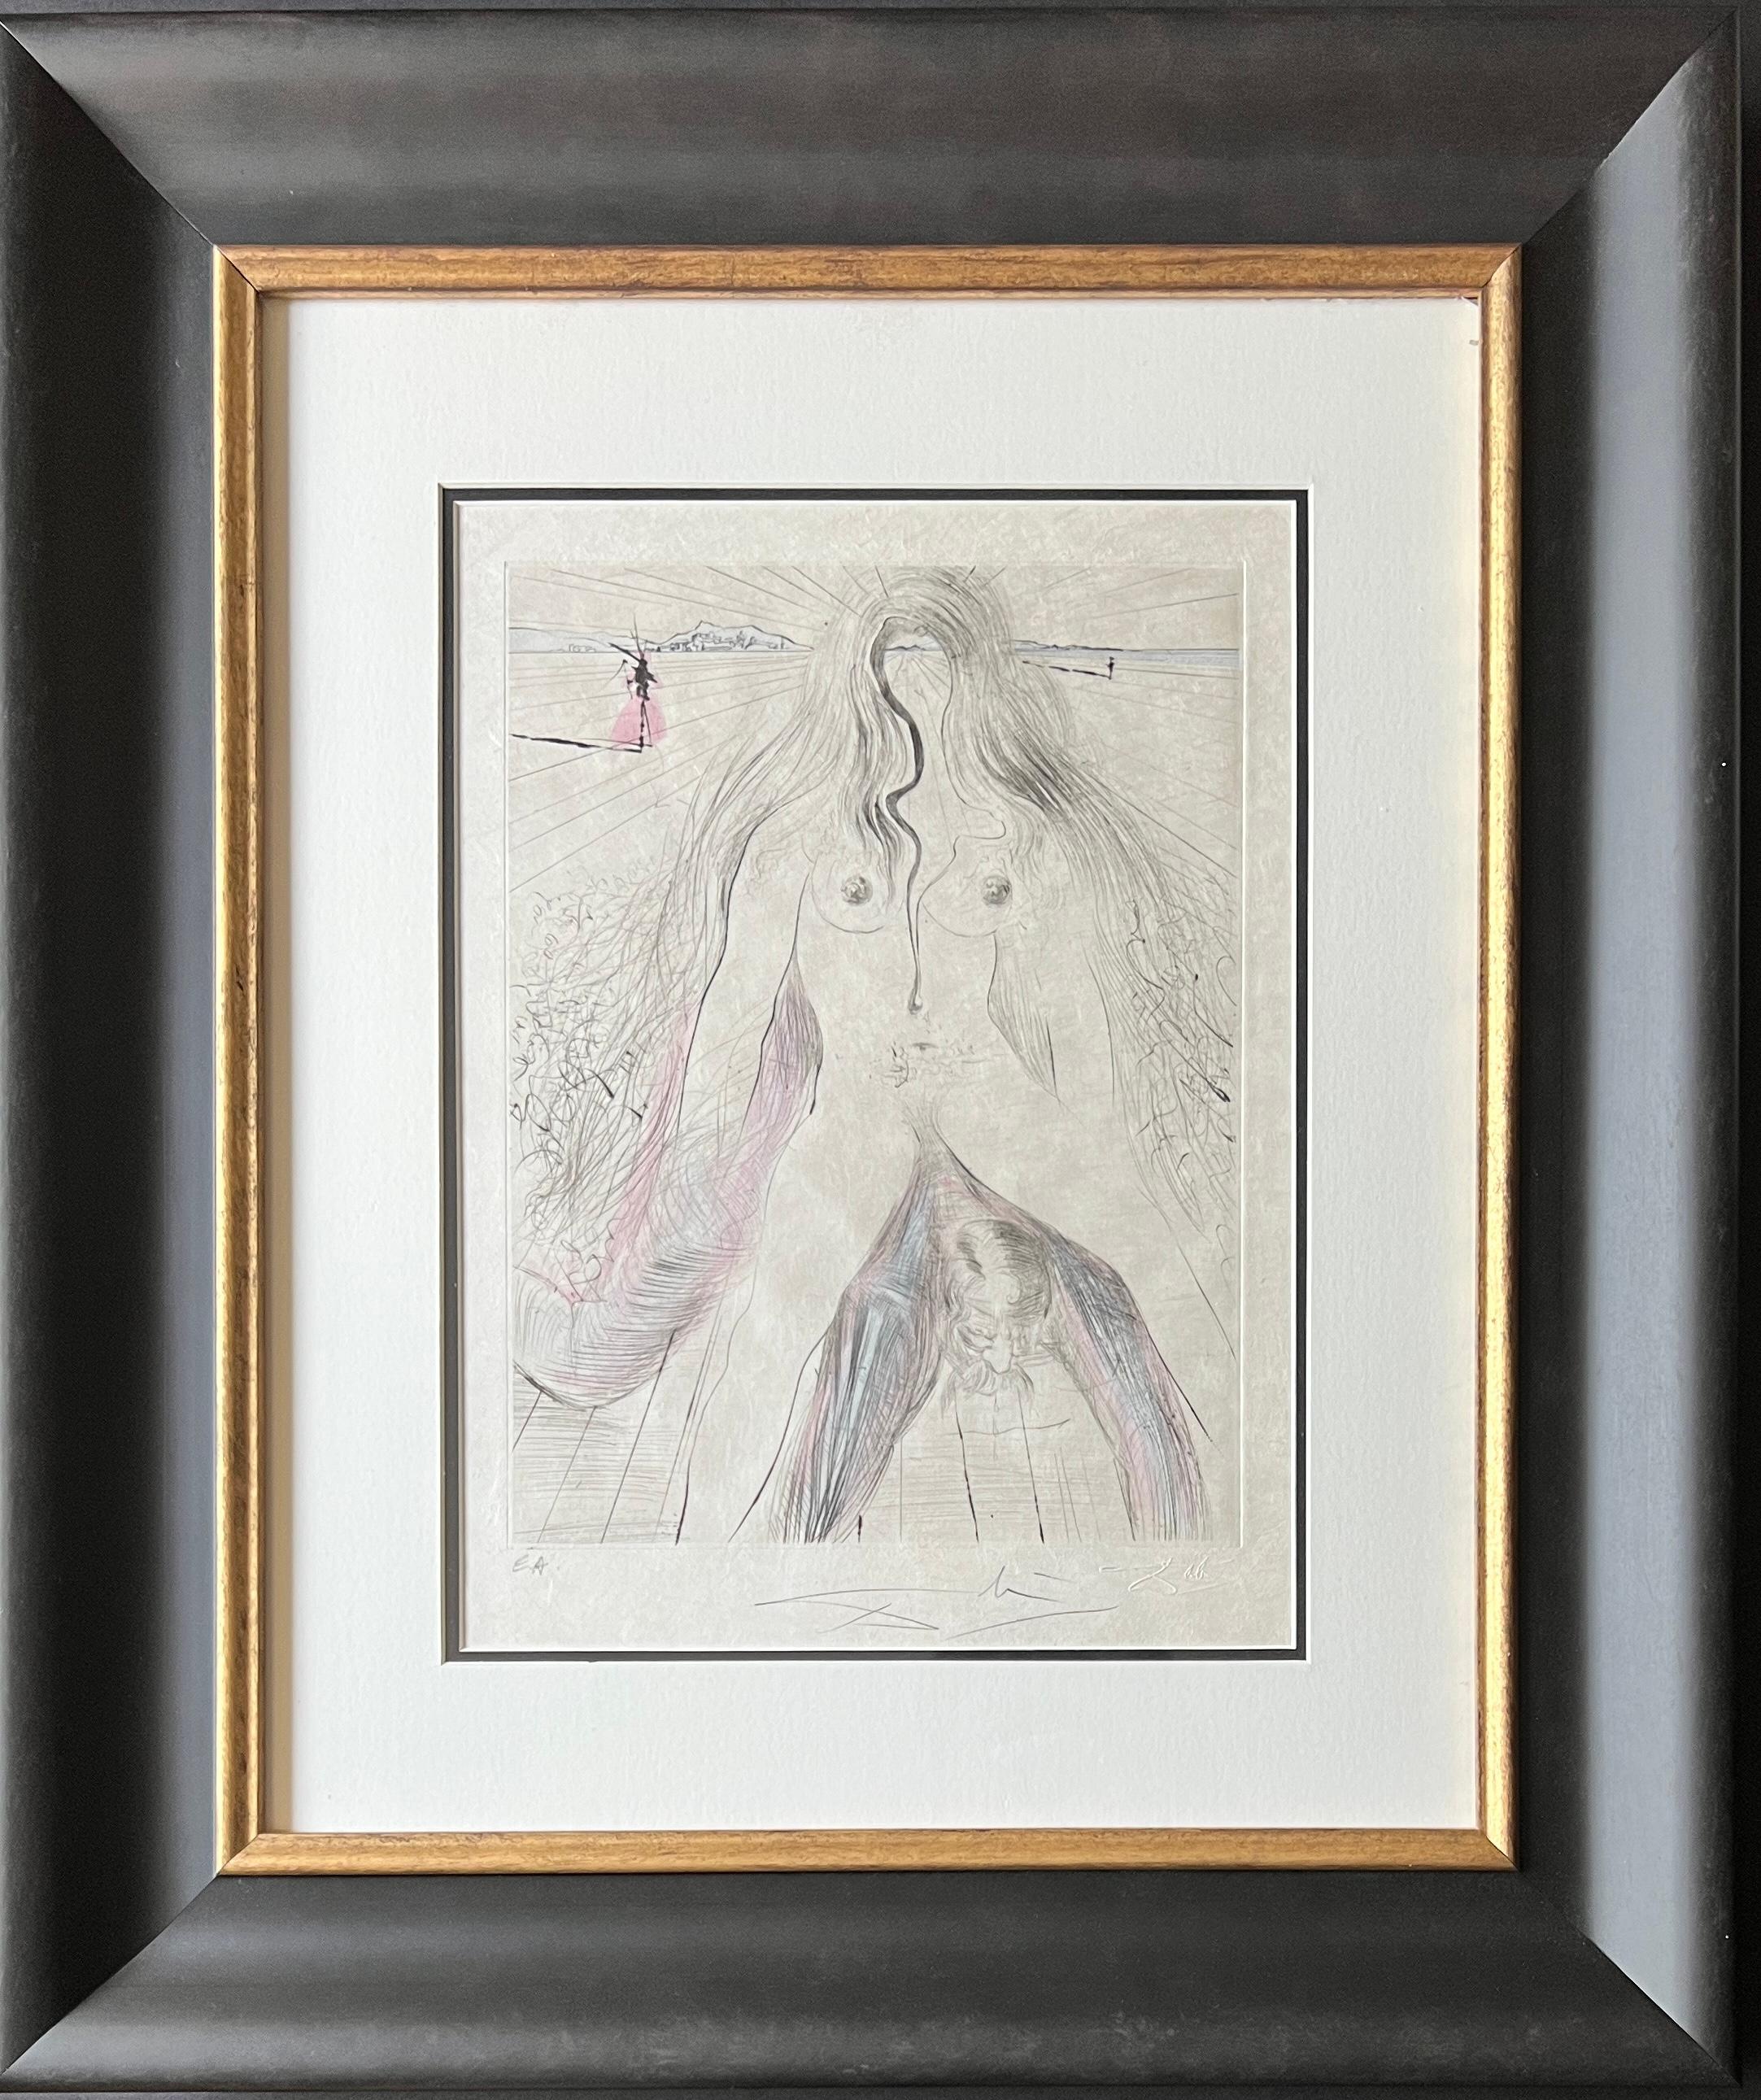 Salvador Dalí – Femme à cheval - hand watercolored drypoint etching – 1969